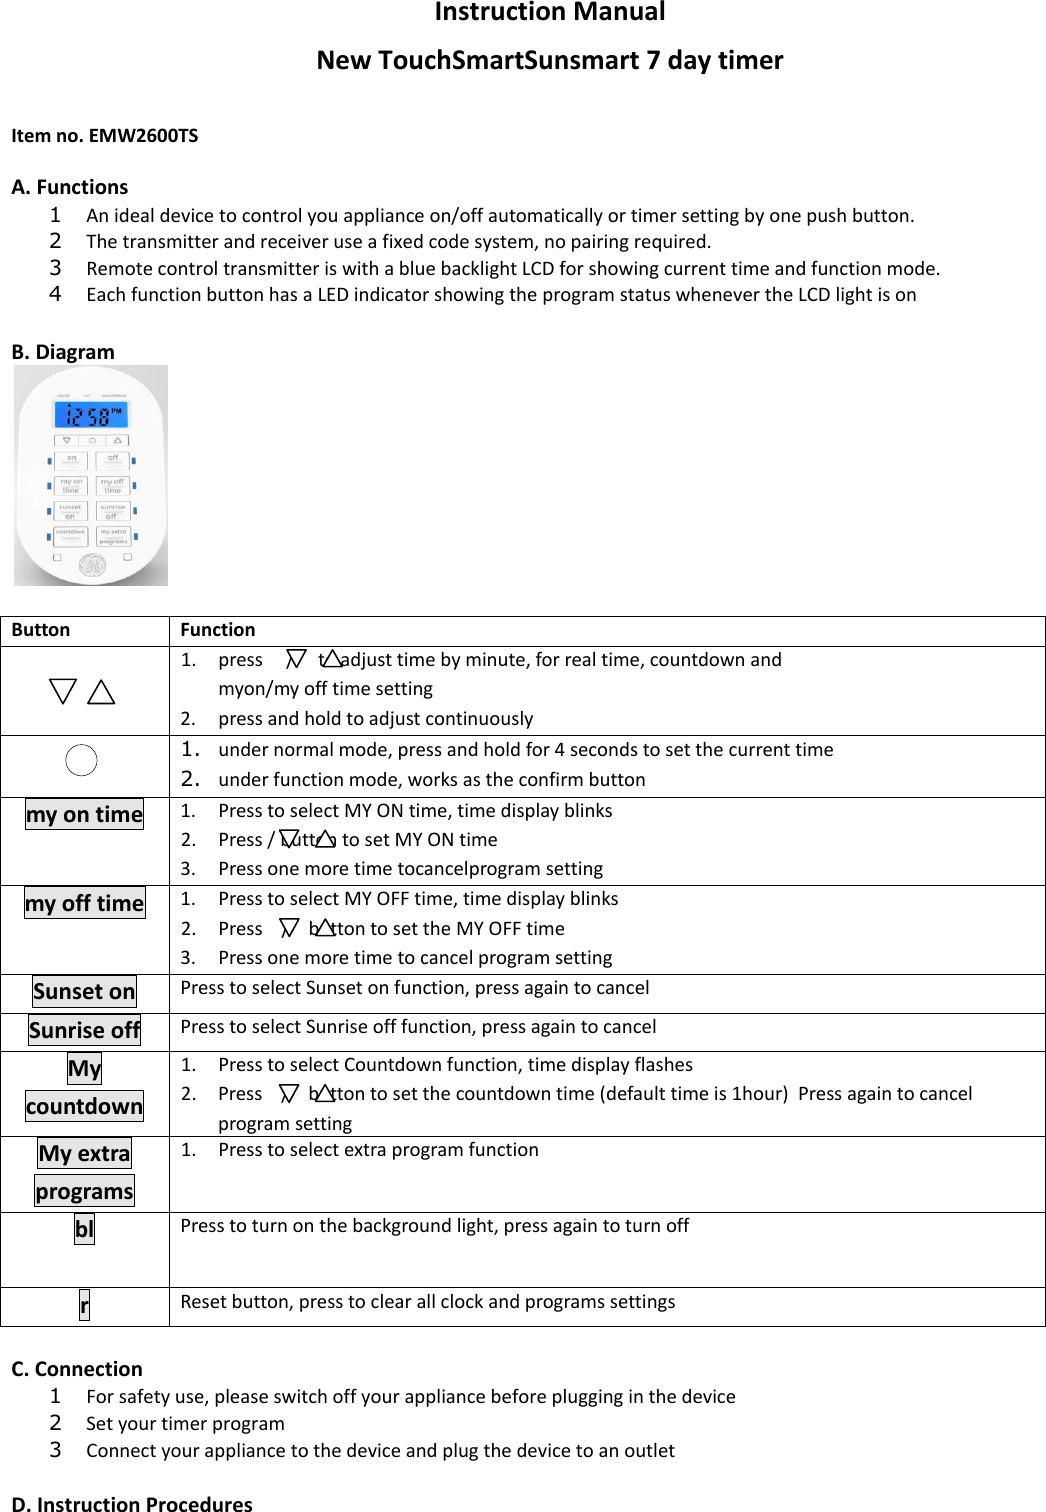 Instruction Manual New TouchSmartSunsmart 7 day timer  Item no. EMW2600TS  A. Functions  1 An ideal device to control you appliance on/off automatically or timer setting by one push button.  2 The transmitter and receiver use a fixed code system, no pairing required.  3 Remote control transmitter is with a blue backlight LCD for showing current time and function mode.  4 Each function button has a LED indicator showing the program status whenever the LCD light is on  B. Diagram   Button Function   1. press     /     to adjust time by minute, for real time, countdown and  myon/my off time setting  2. press and hold to adjust continuously  1. under normal mode, press and hold for 4 seconds to set the current time 2. under function mode, works as the confirm button my on time 1. Press to select MY ON time, time display blinks  2. Press / button to set MY ON time 3. Press one more time tocancelprogram setting my off time 1. Press to select MY OFF time, time display blinks  2. Press    /    button to set the MY OFF time 3. Press one more time to cancel program setting Sunset on Press to select Sunset on function, press again to cancel Sunrise off Press to select Sunrise off function, press again to cancel My countdown 1. Press to select Countdown function, time display flashes  2. Press    /    button to set the countdown time (default time is 1hour)  Press again to cancel program setting My extra programs 1. Press to select extra program function bl Press to turn on the background light, press again to turn off r Reset button, press to clear all clock and programs settings  C. Connection 1 For safety use, please switch off your appliance before plugging in the device 2 Set your timer program 3 Connect your appliance to the device and plug the device to an outlet  D. Instruction Procedures  